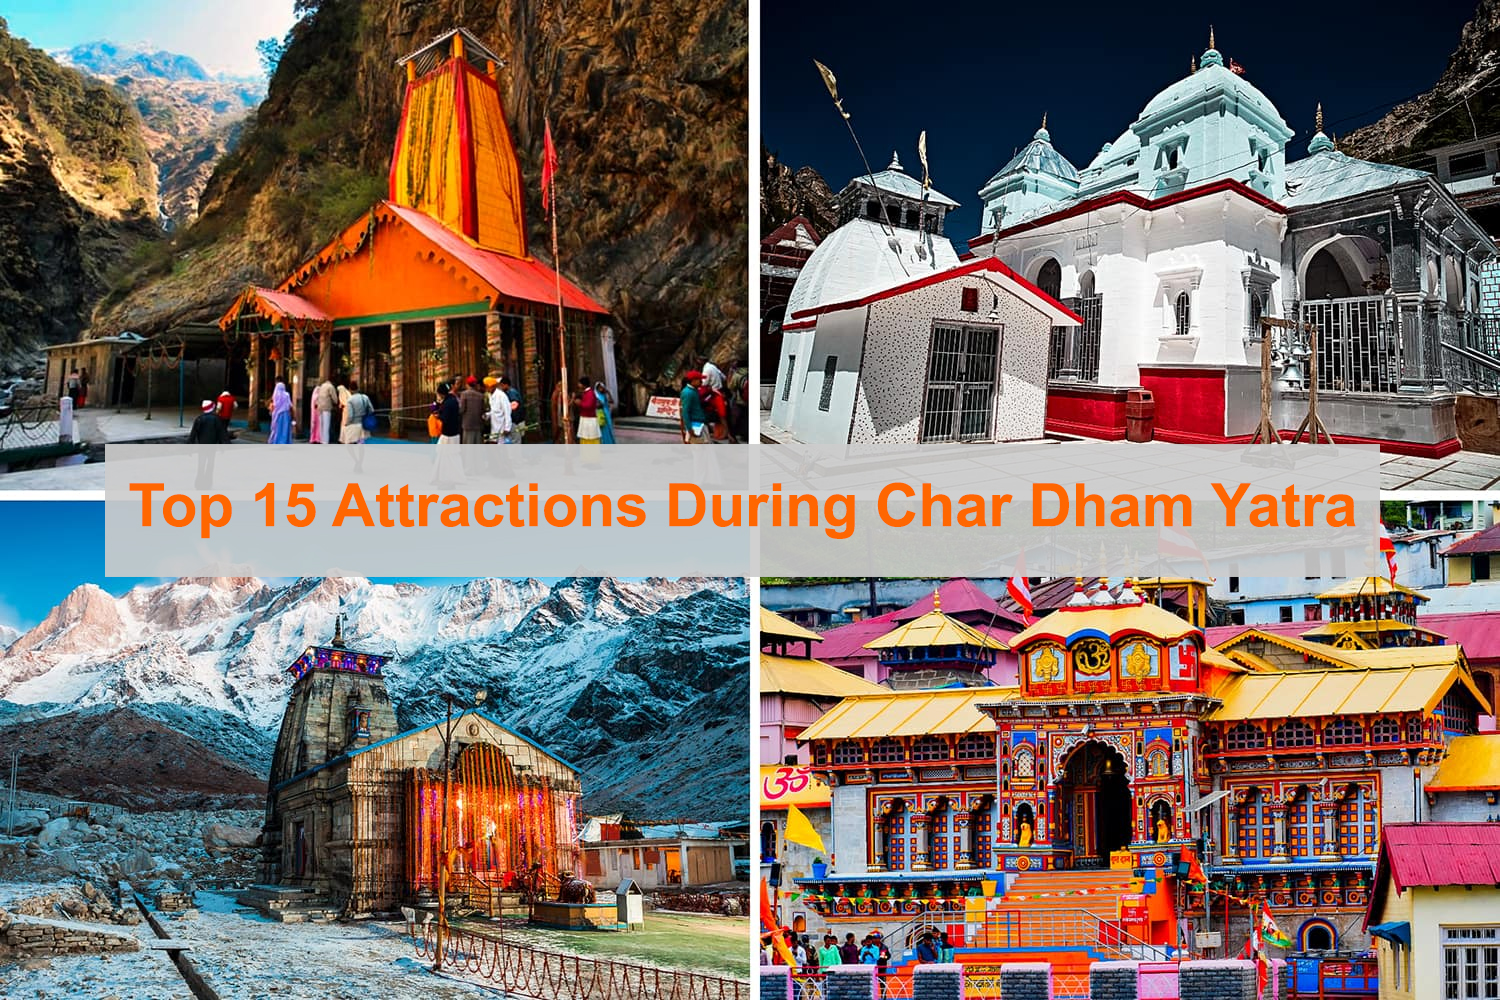 Places to Visit During Char Dham Yatra